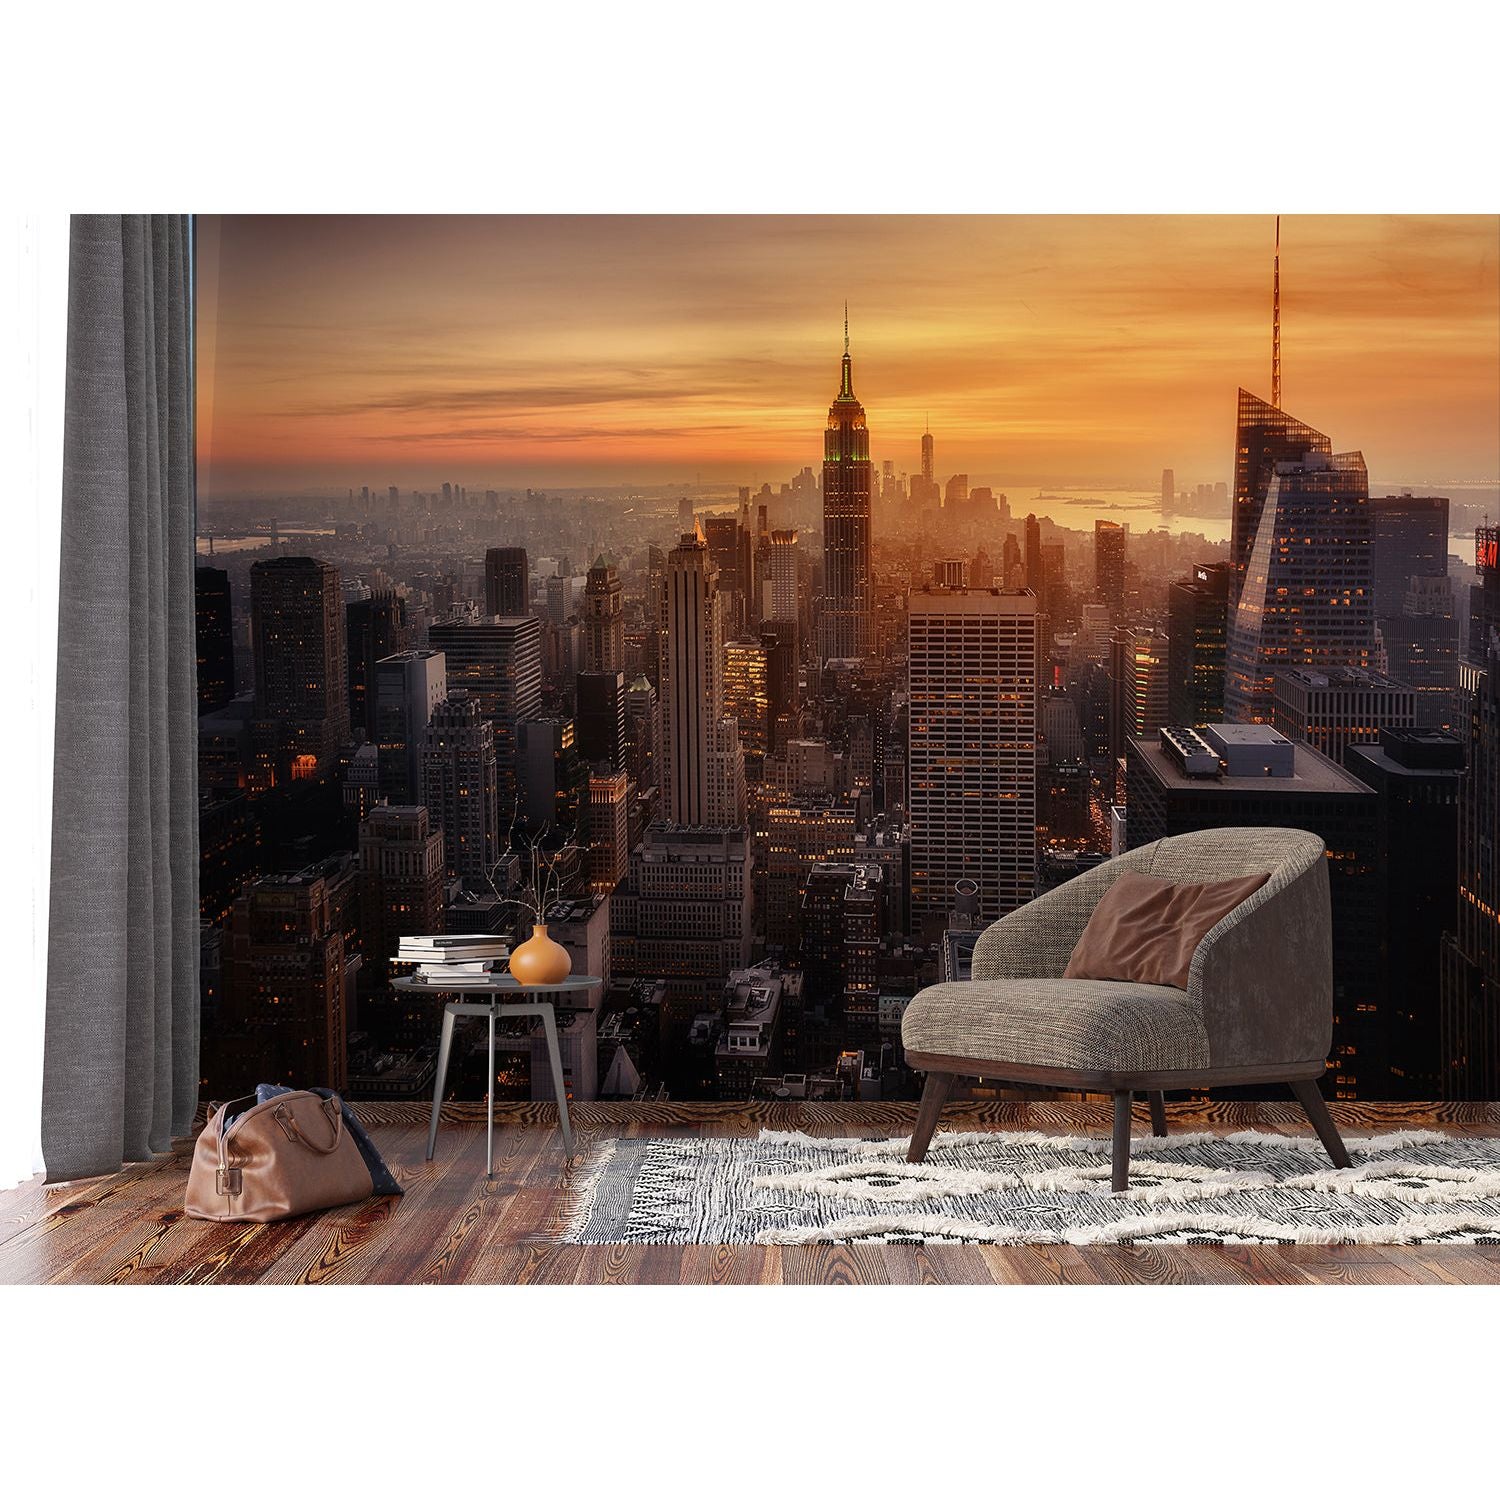 Sunset Serenity: Cityscape Wall Mural